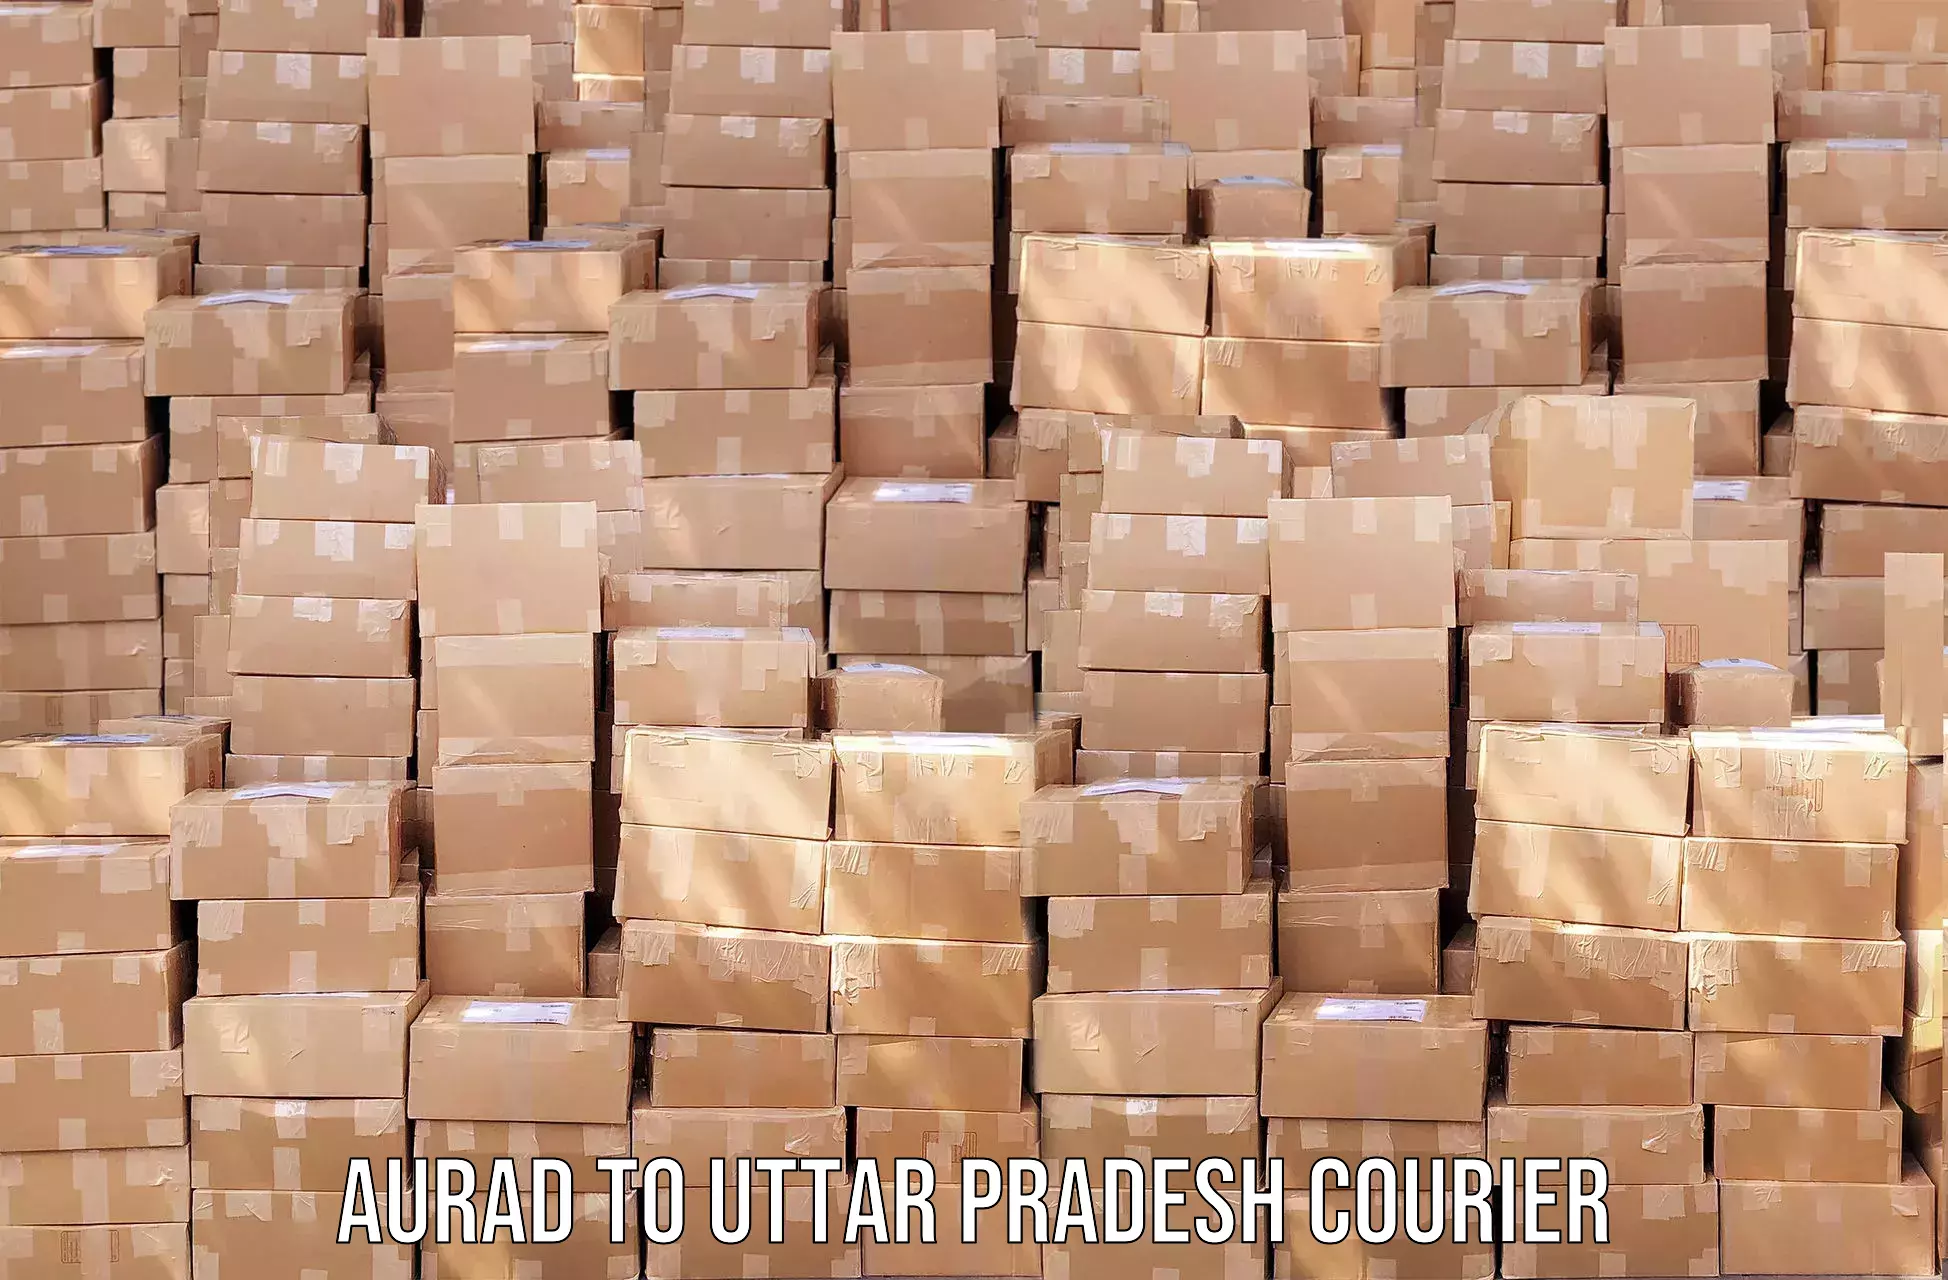 Global shipping solutions Aurad to Sultanpur